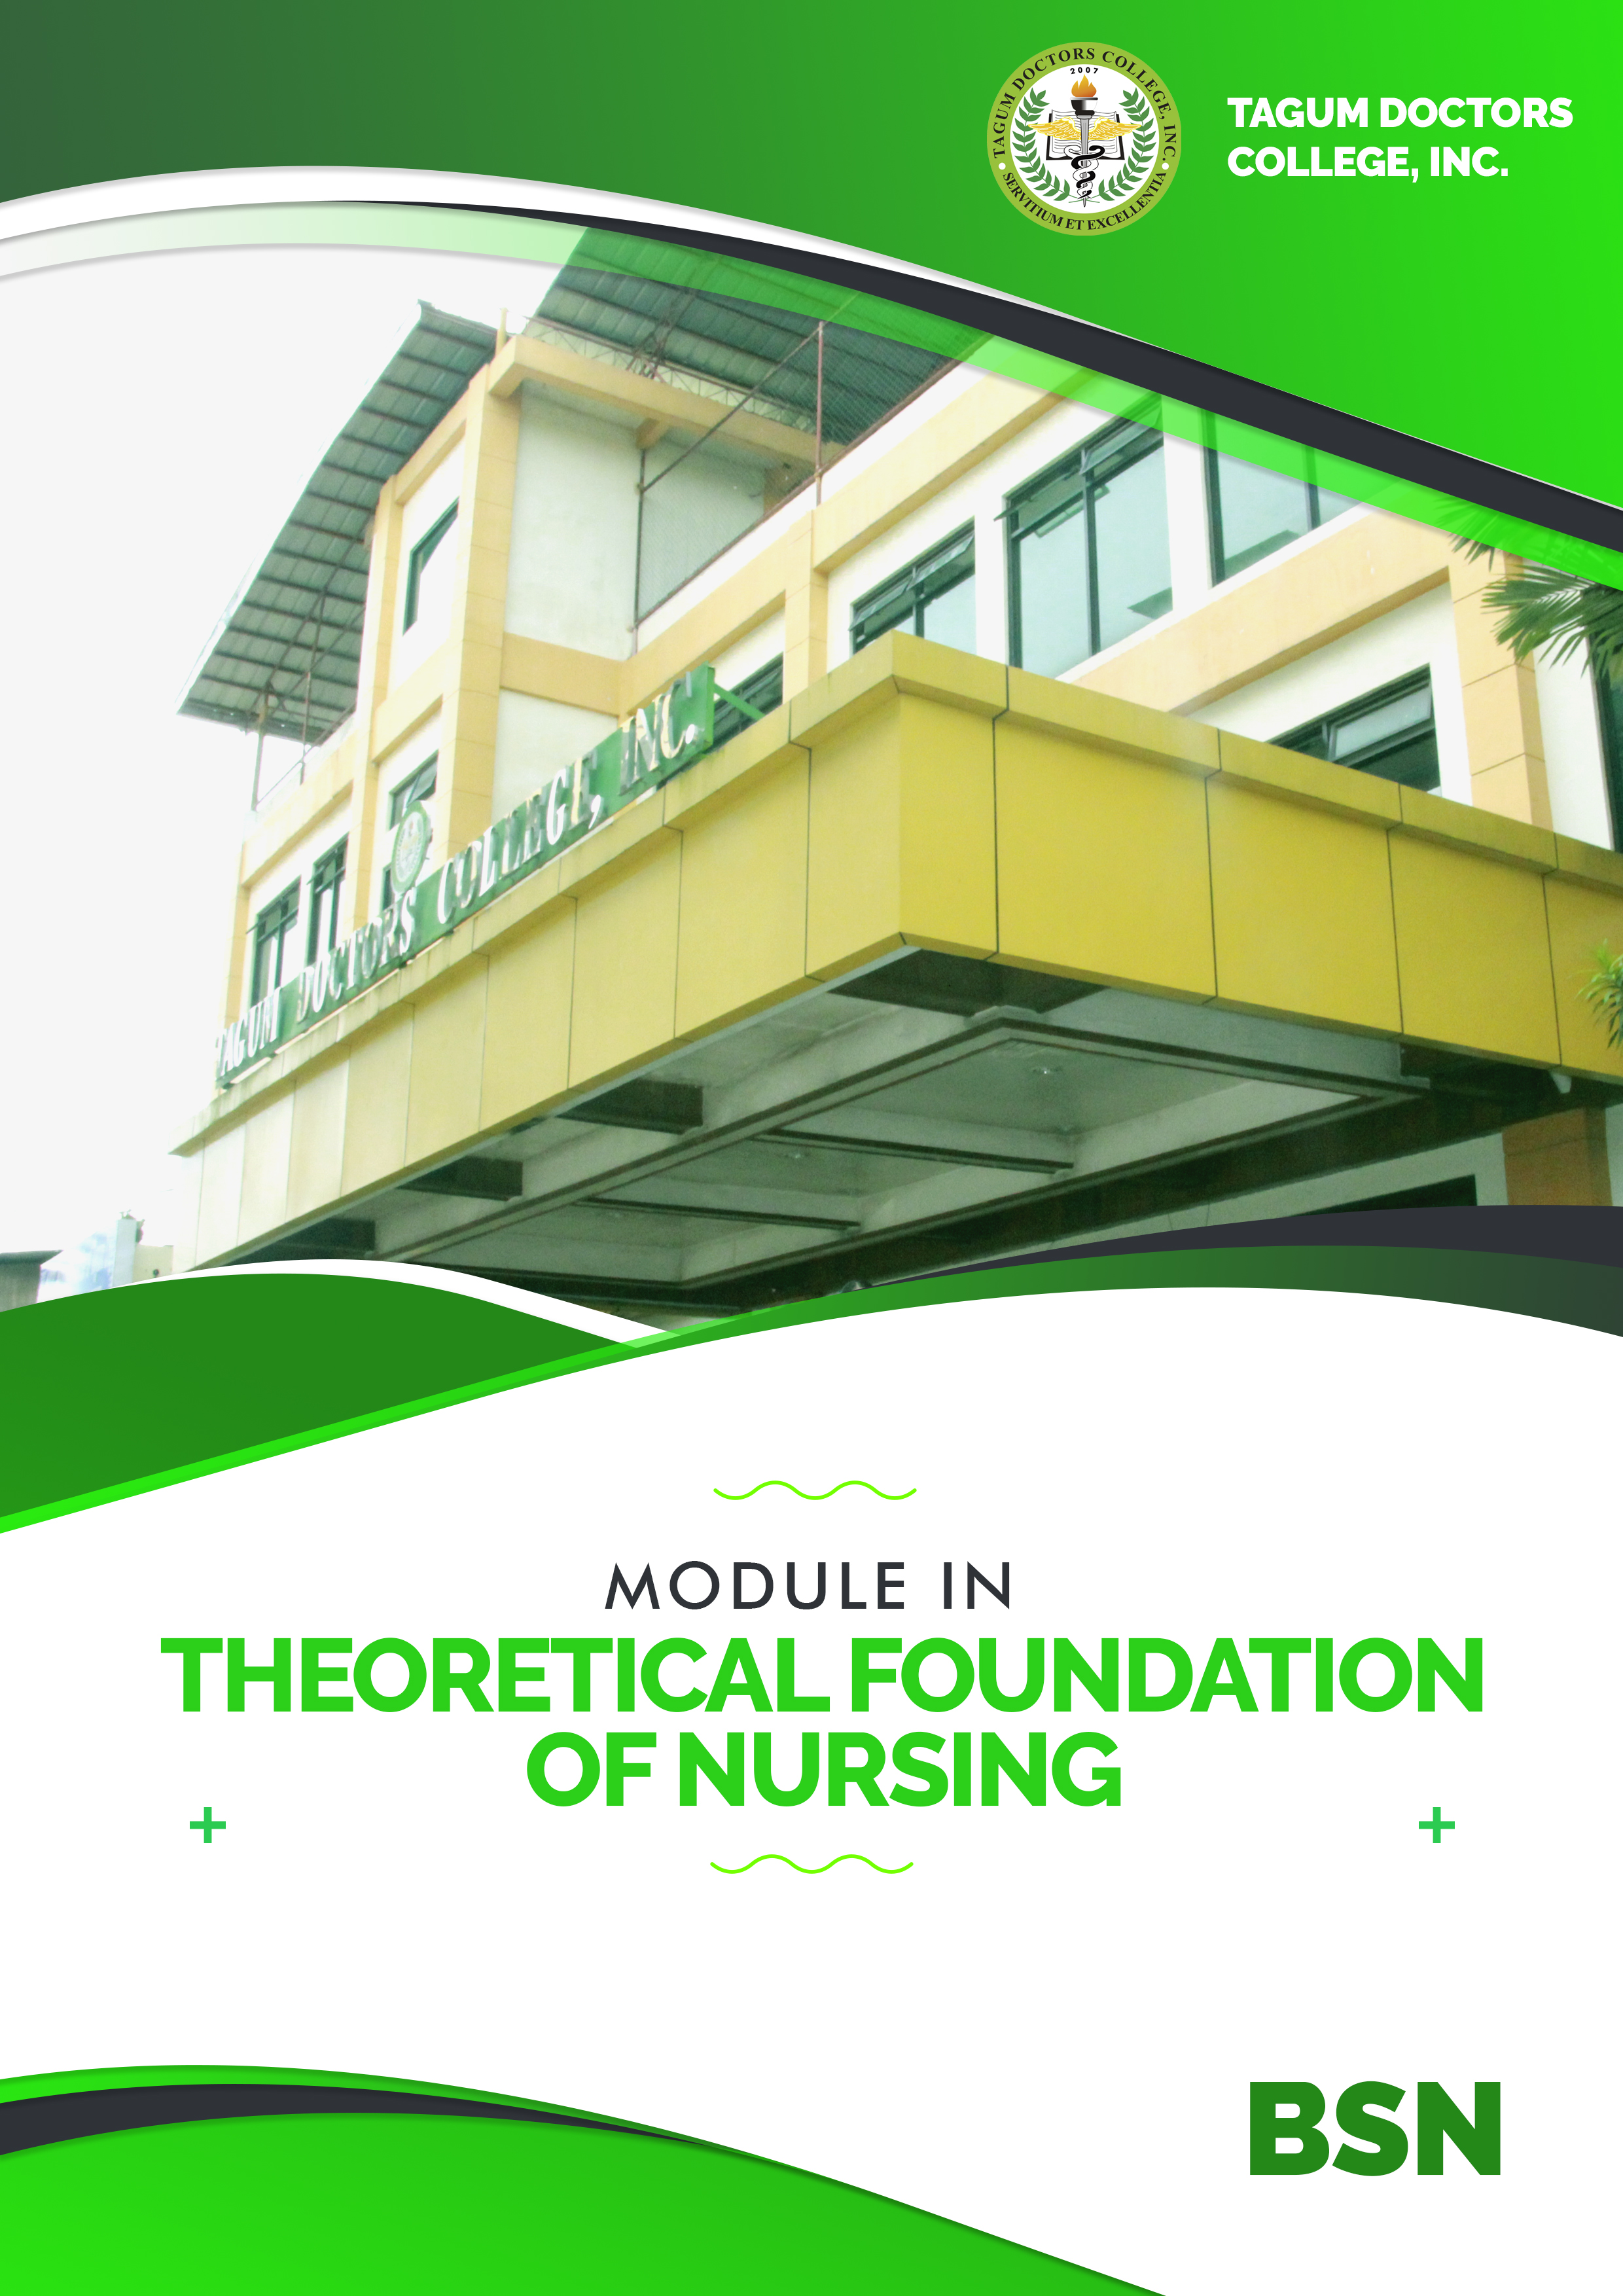 Theoretical Foundations of Nursing - BSN 1-D